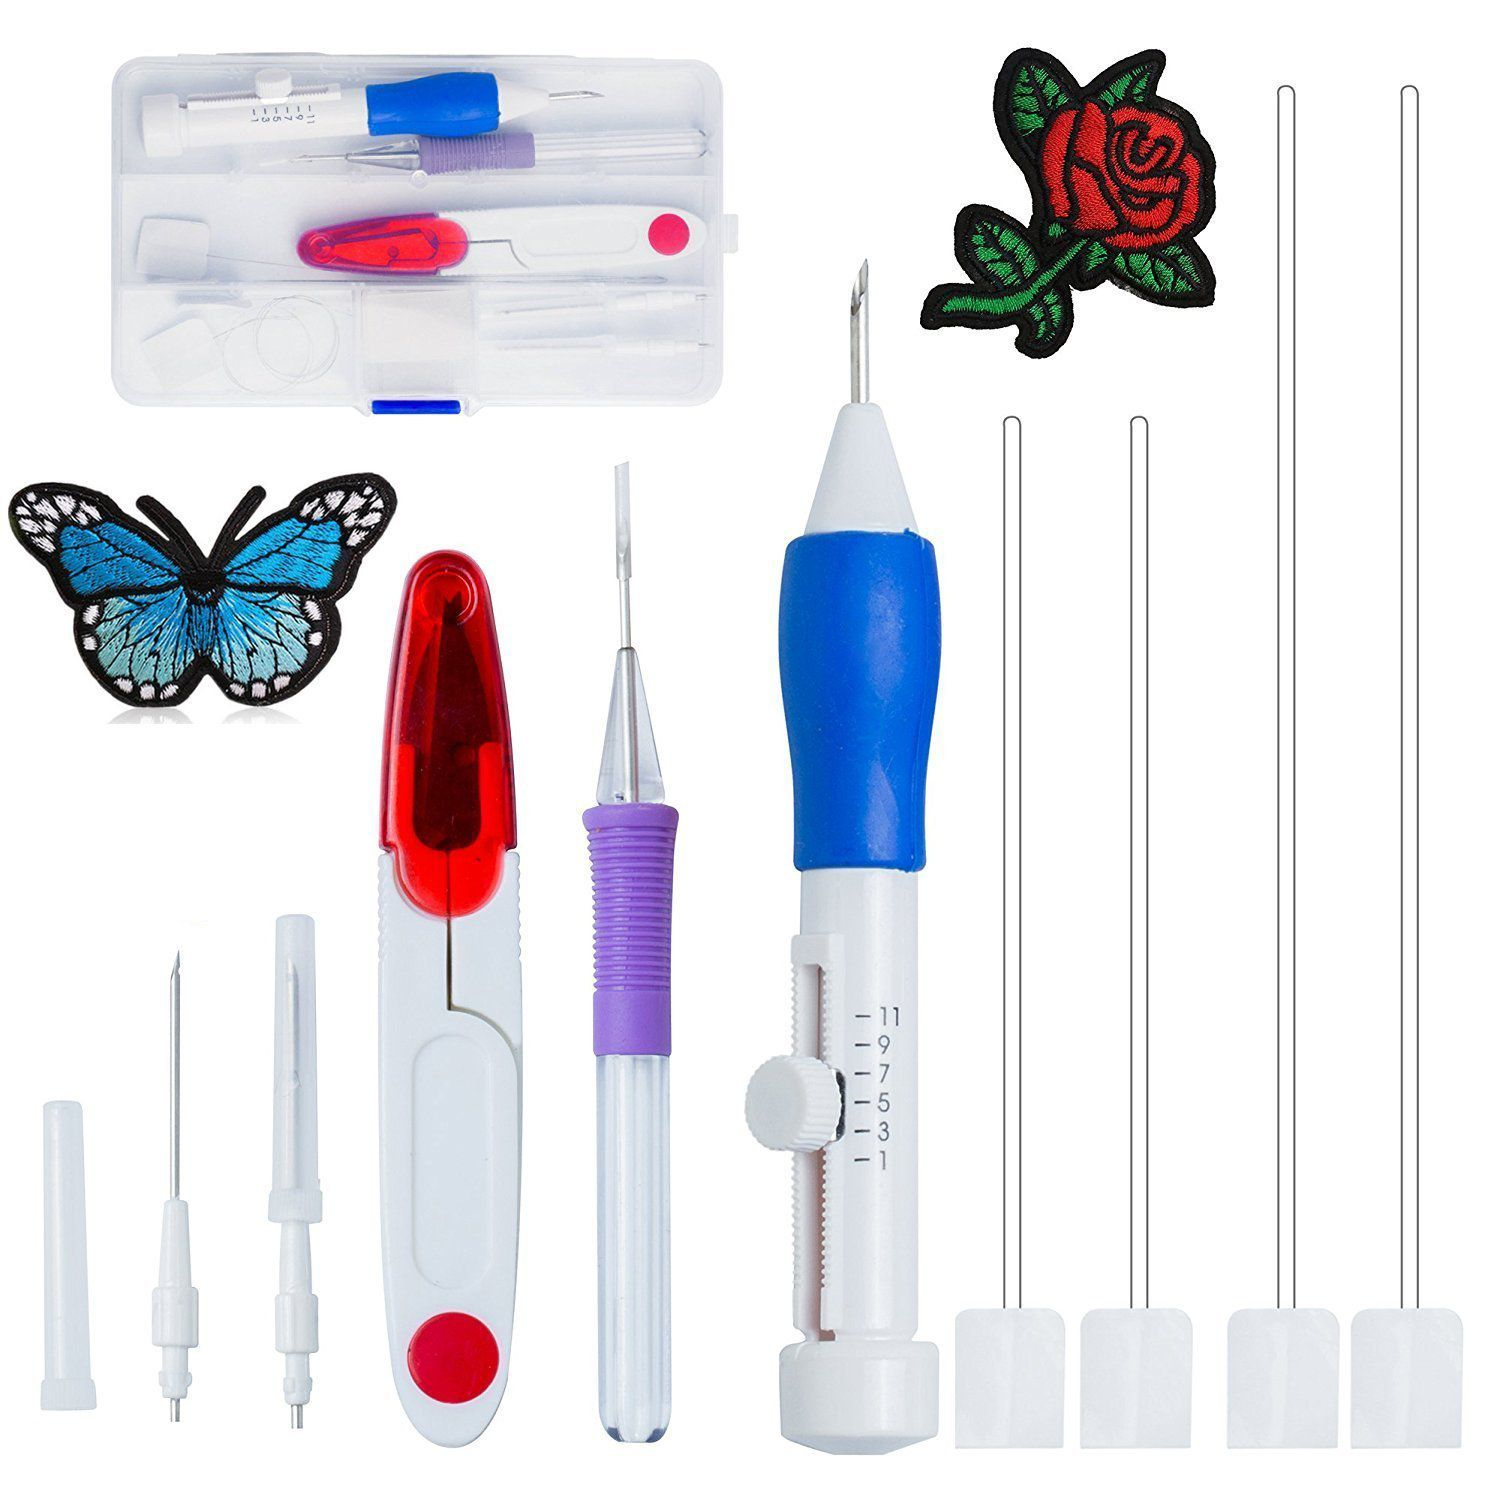 Embroidery Patterns Online Aeoss Magic Embroidery Pen Punch Tool Kit Embroidery Patterns Punch Needle Craft Tool Set For Diy Sewing Cross Stiching